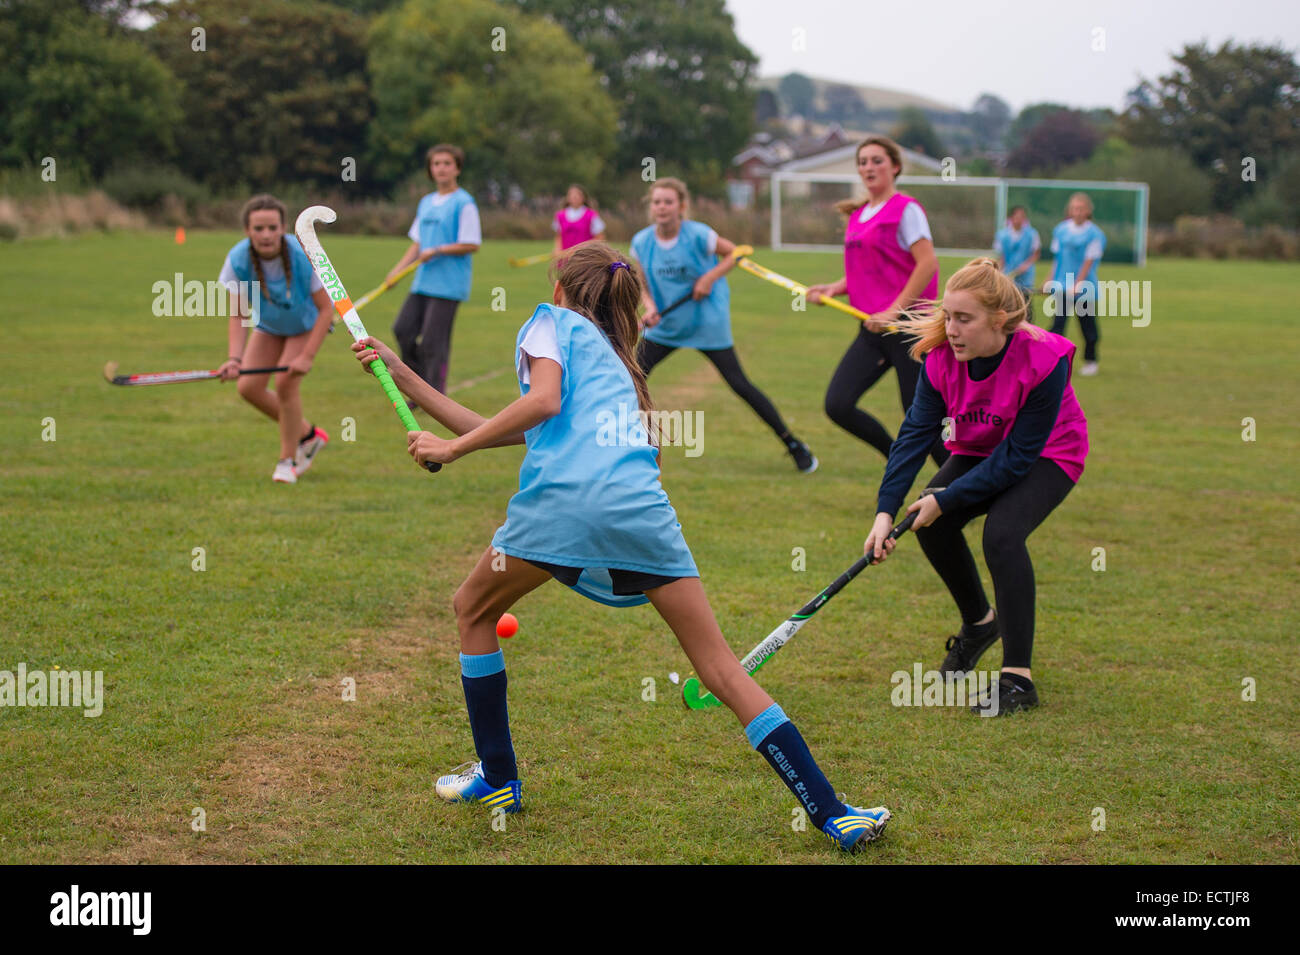 Secondary school PE physical education Wales UK: young 13 14 year old teenage girls playing field hockey outdoors on a school playing field ground pitch Stock Photo